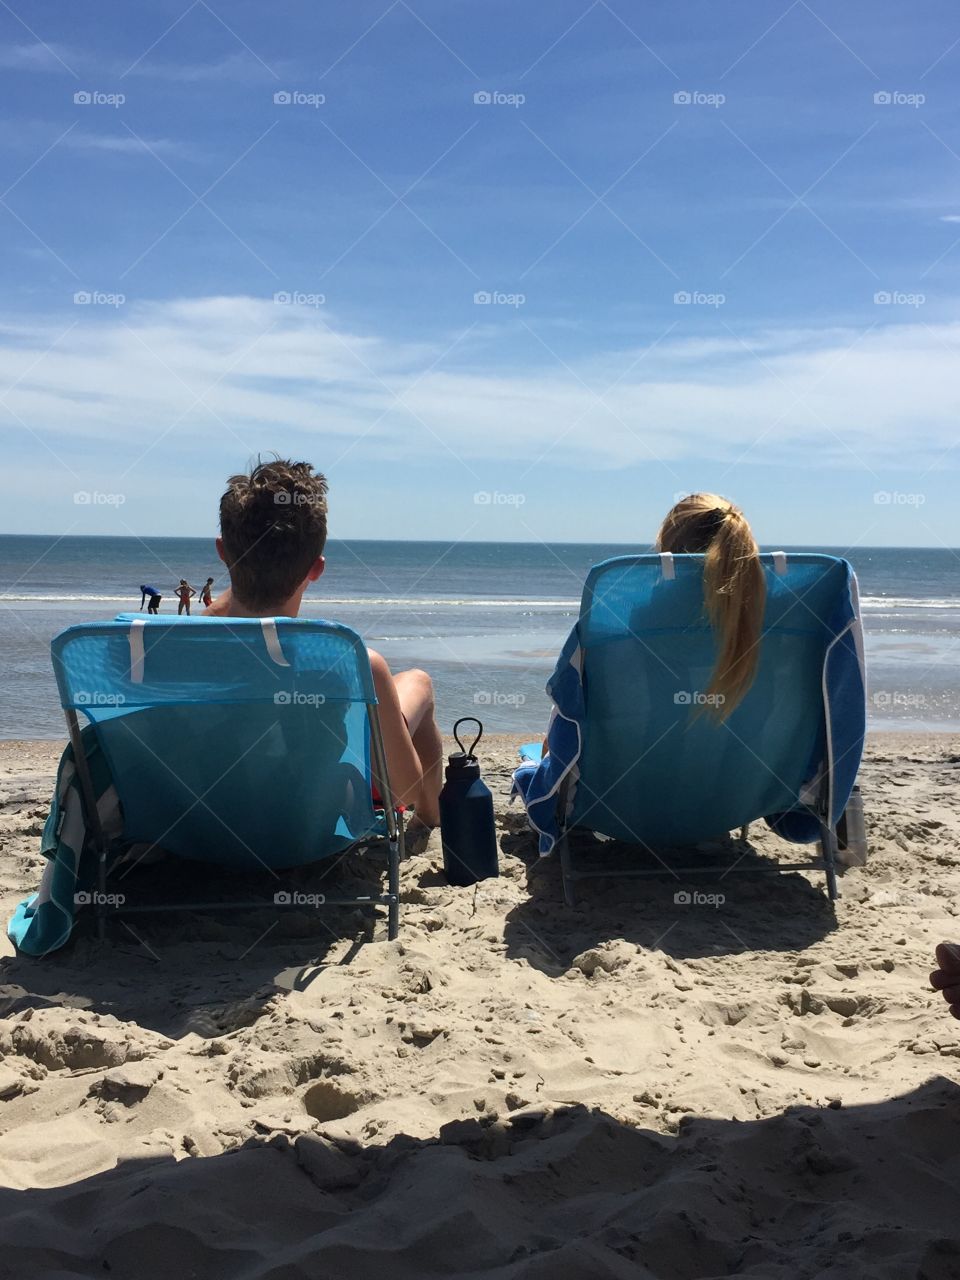 Me and my boyfriend, tanning and listening to the waves at the Outerbanks beach in Corolla.